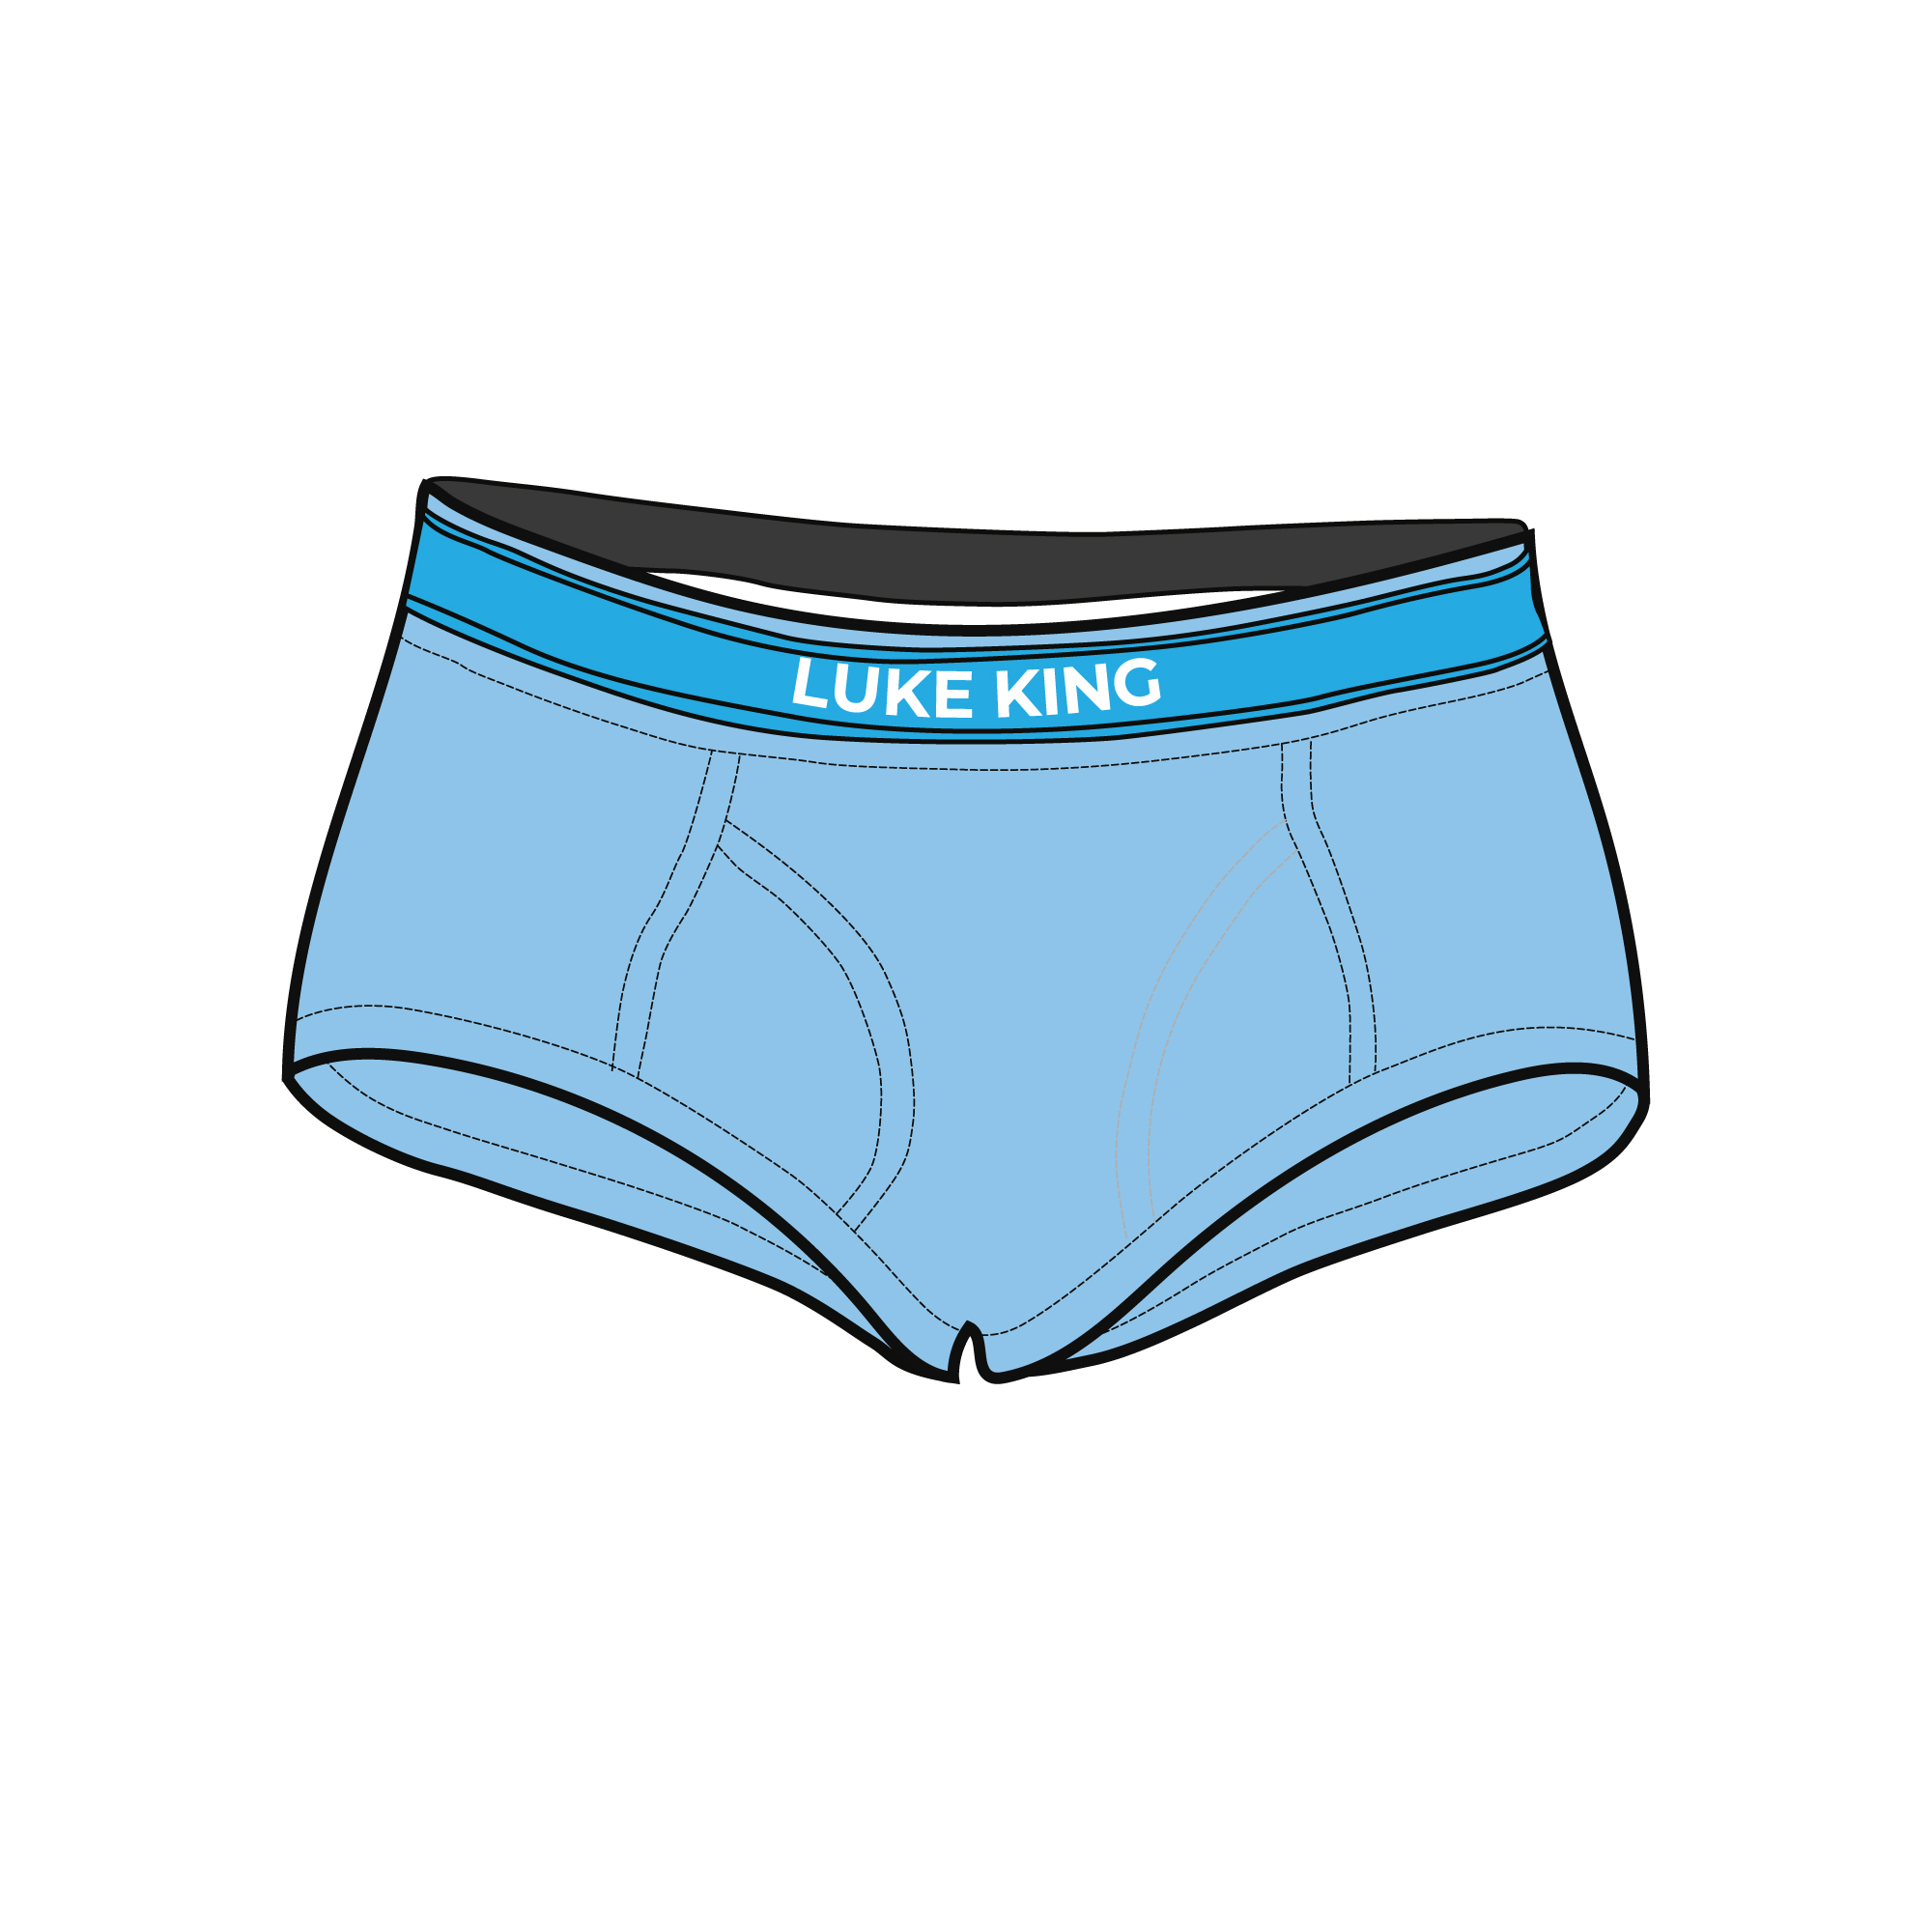 4,900+ Boxer Briefs Stock Illustrations, Royalty-Free Vector Graphics &  Clip Art - iStock